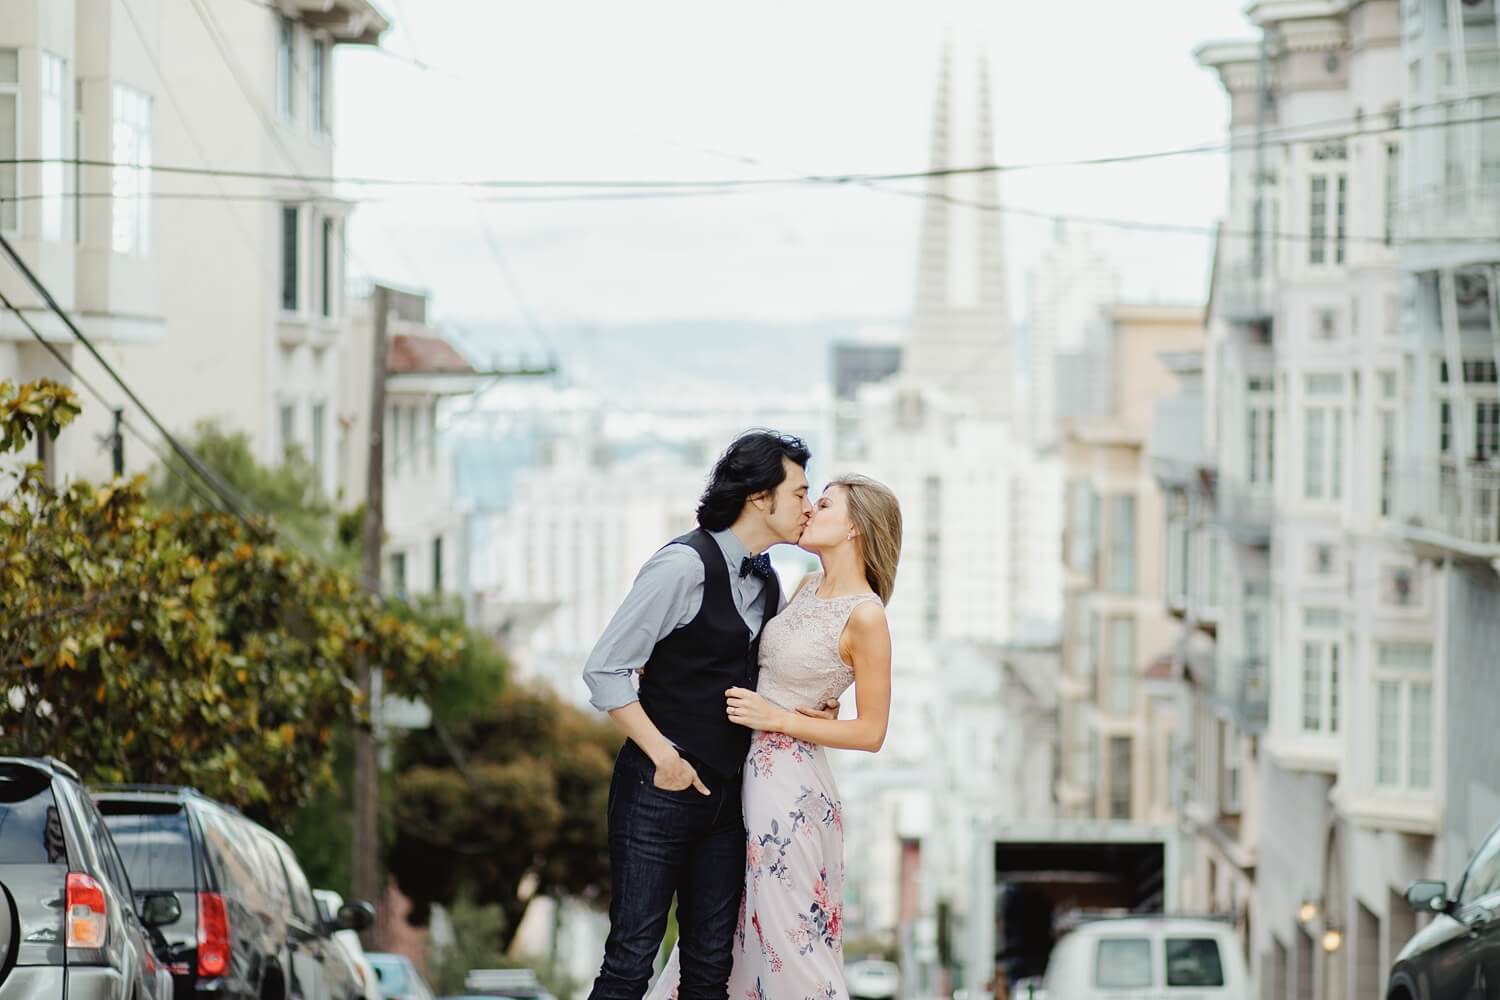 nob hill san francisco engagement session urban photoshoot brick wall cute houses painted ladies sf bay area wedding photographers